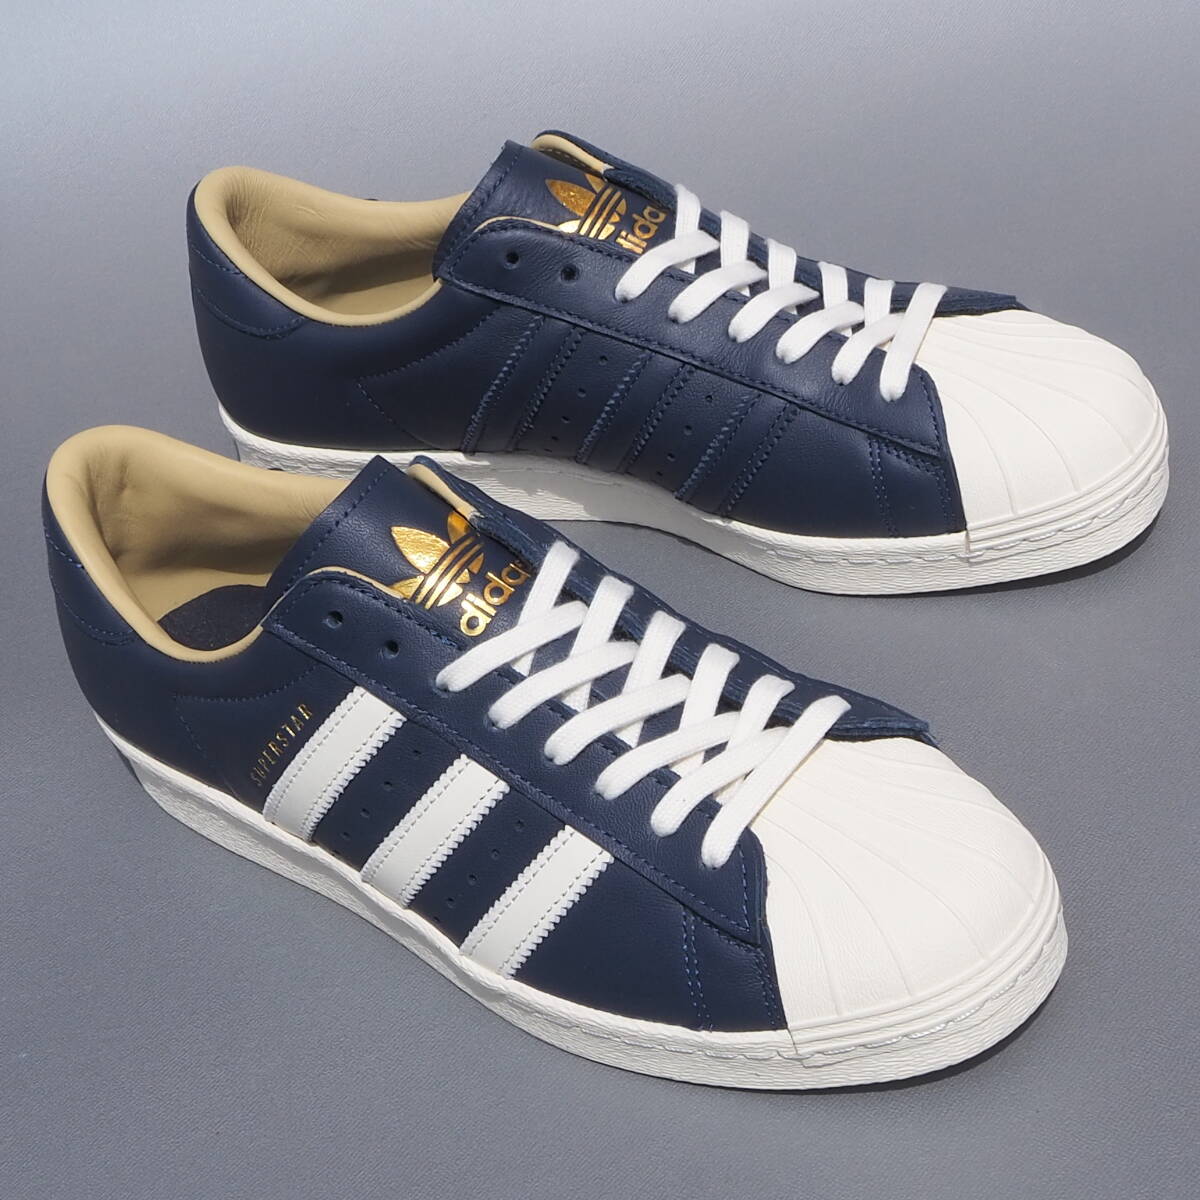  dead!! new goods!! 26,5cm 23 year adidas SUPER STAR 80s TANY NAVY Night Indigo super Star 80sta knee navy leather natural leather box none 